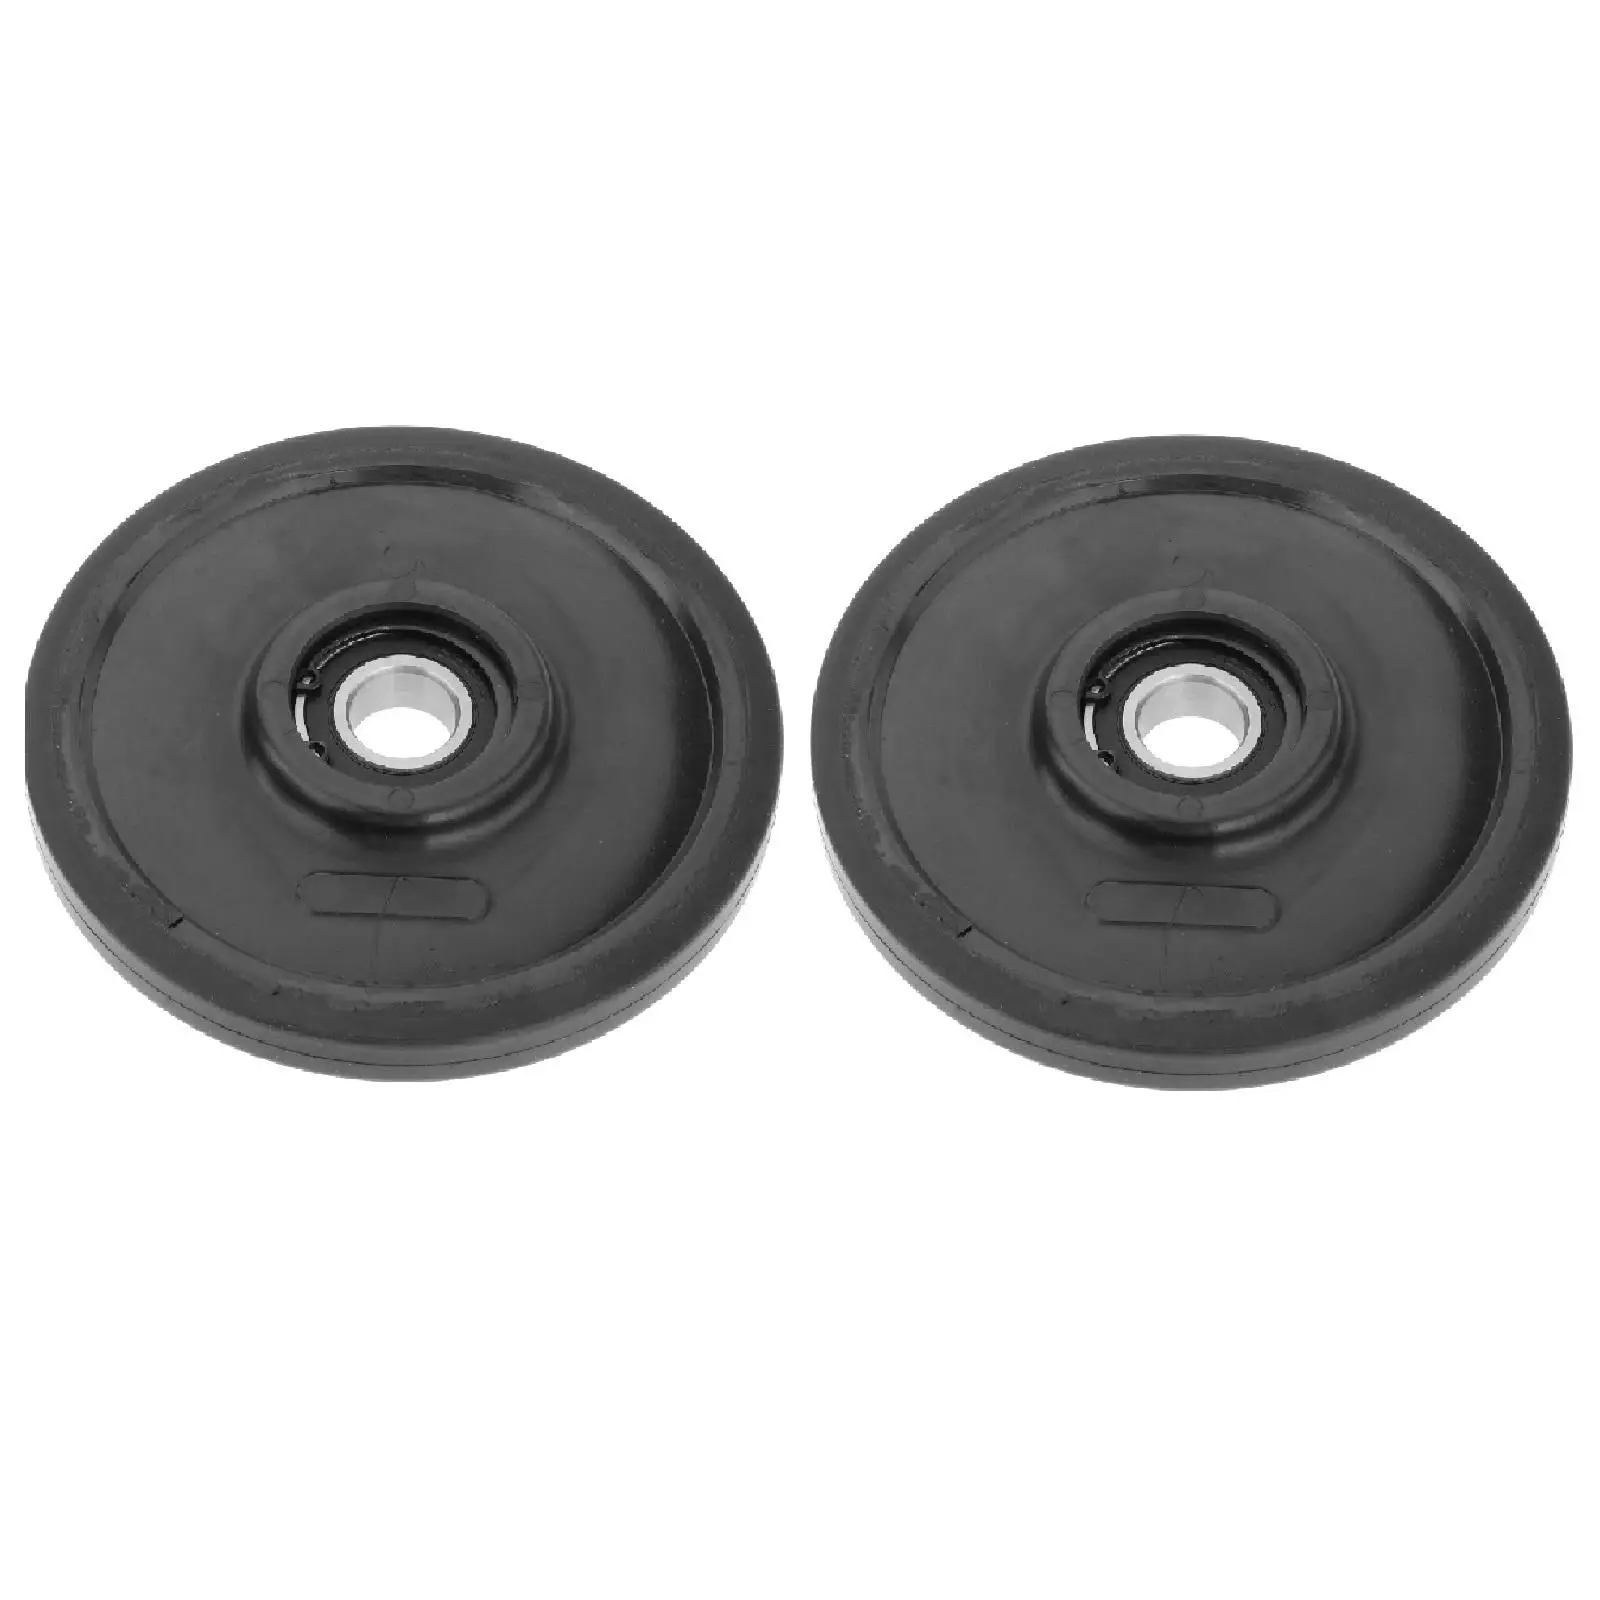 2x Snowmobile Idler Wheel Idler Pulley for Arctic Cat Snowmobile 3604-807